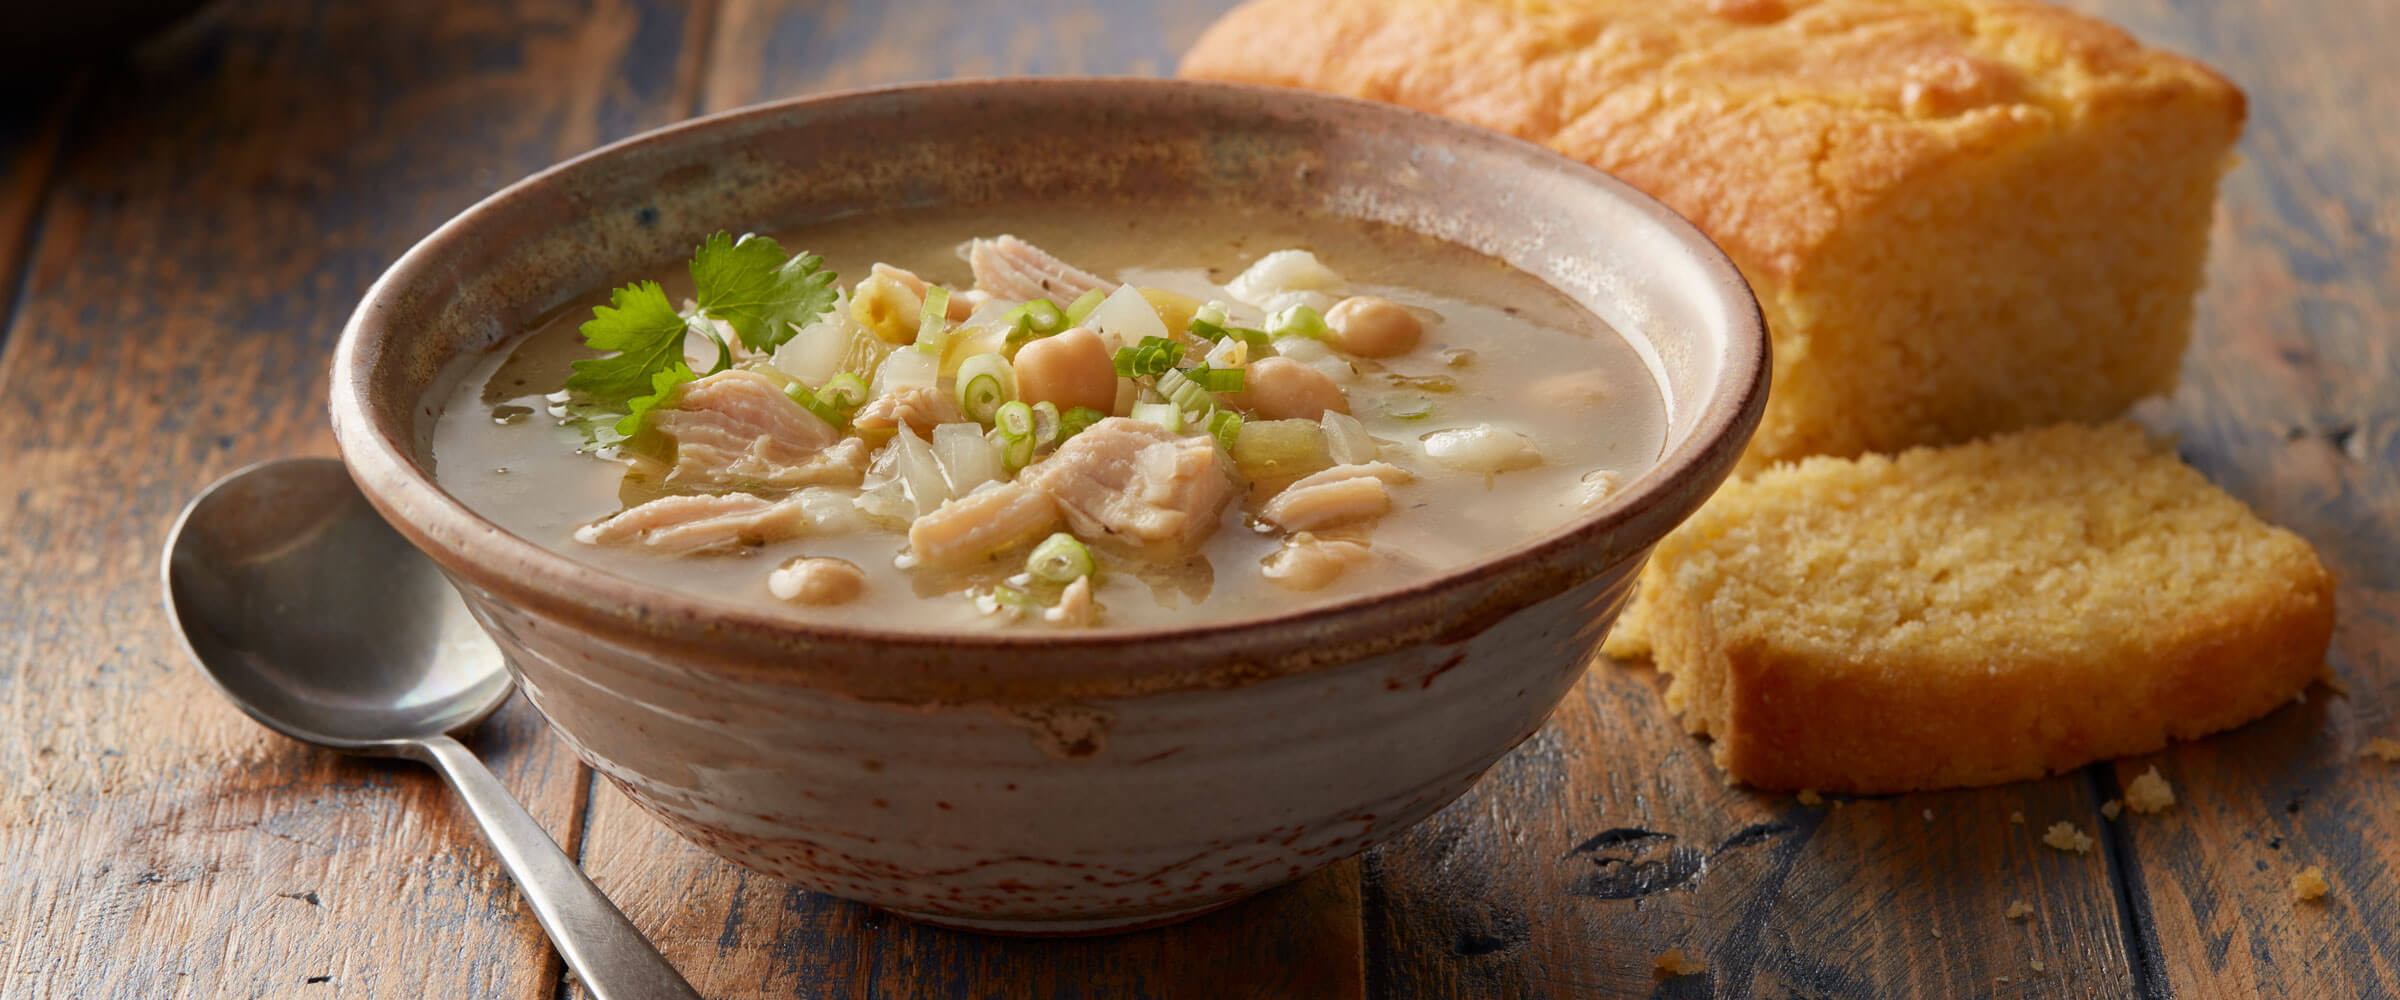 White Chicken Chili in brown bowl with loaf of corn bread